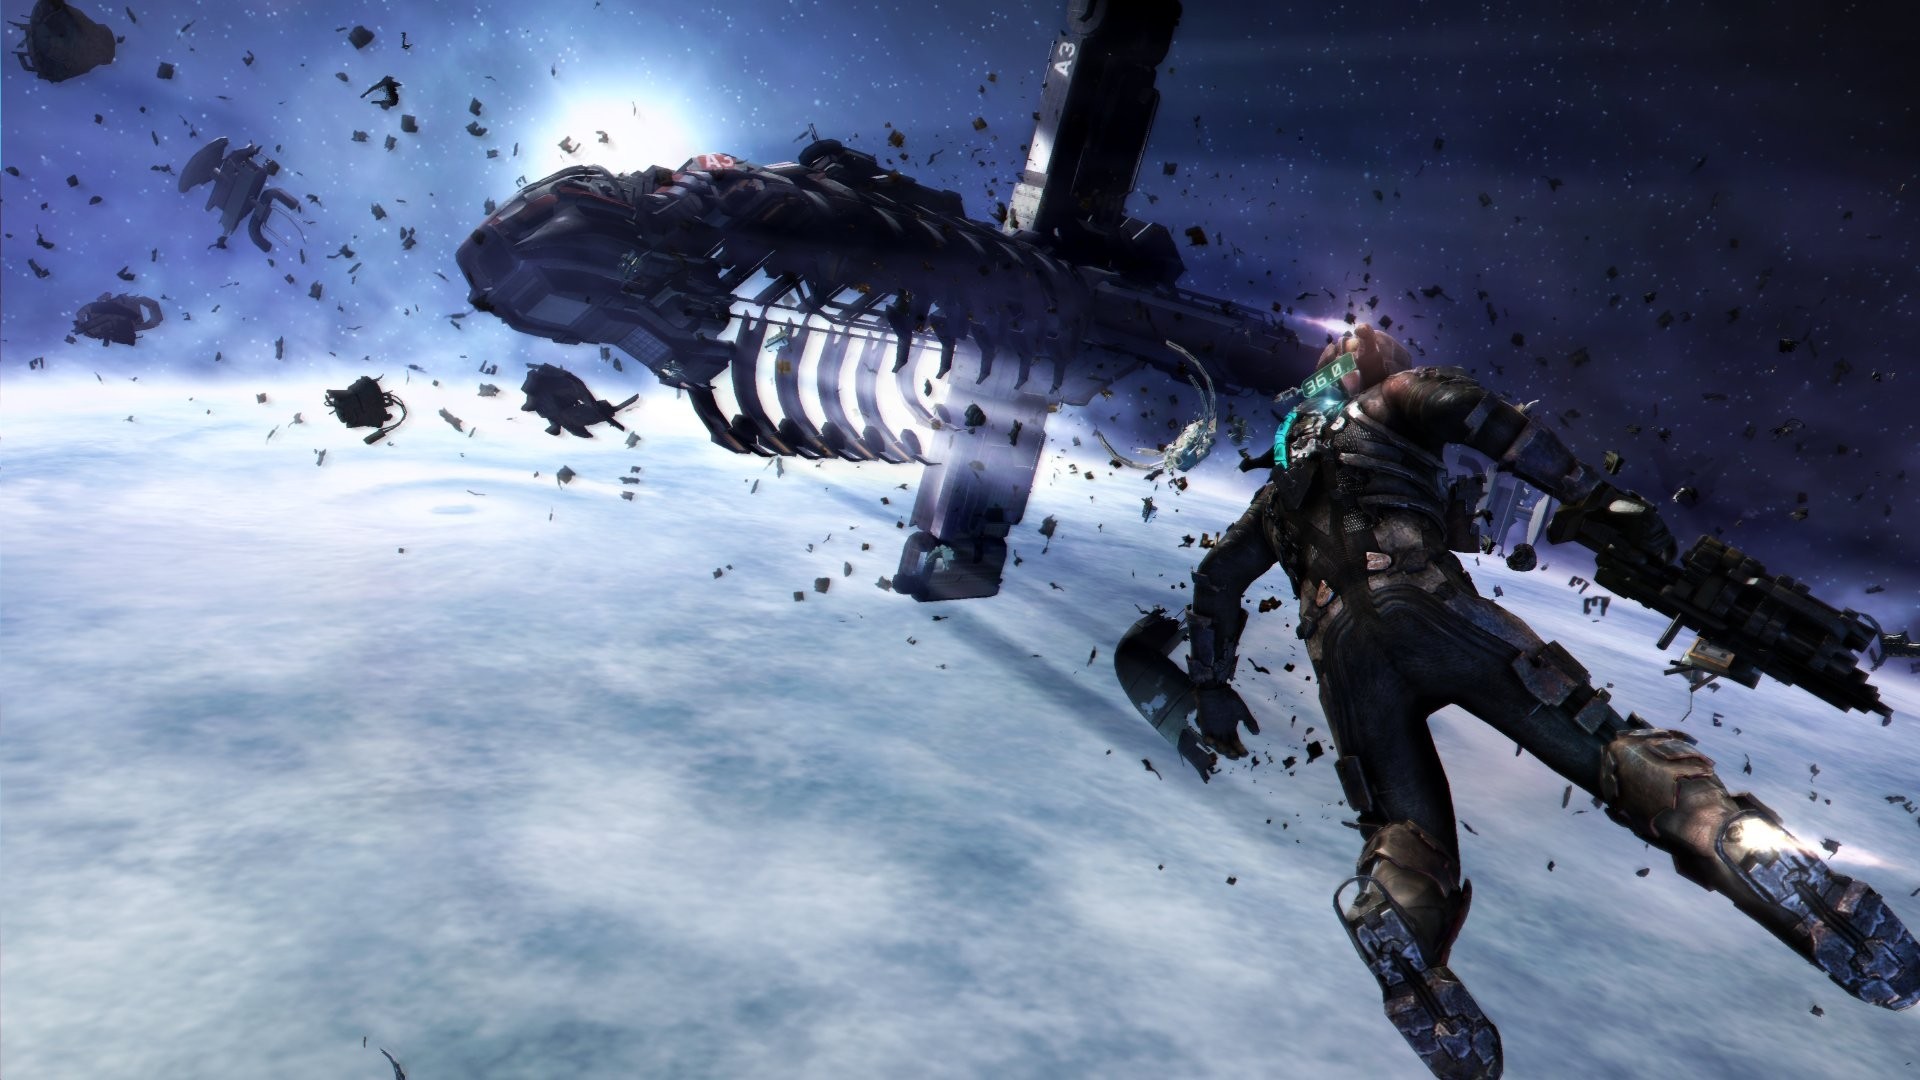 General 1920x1080 Dead Space 3 video games space video game art science fiction